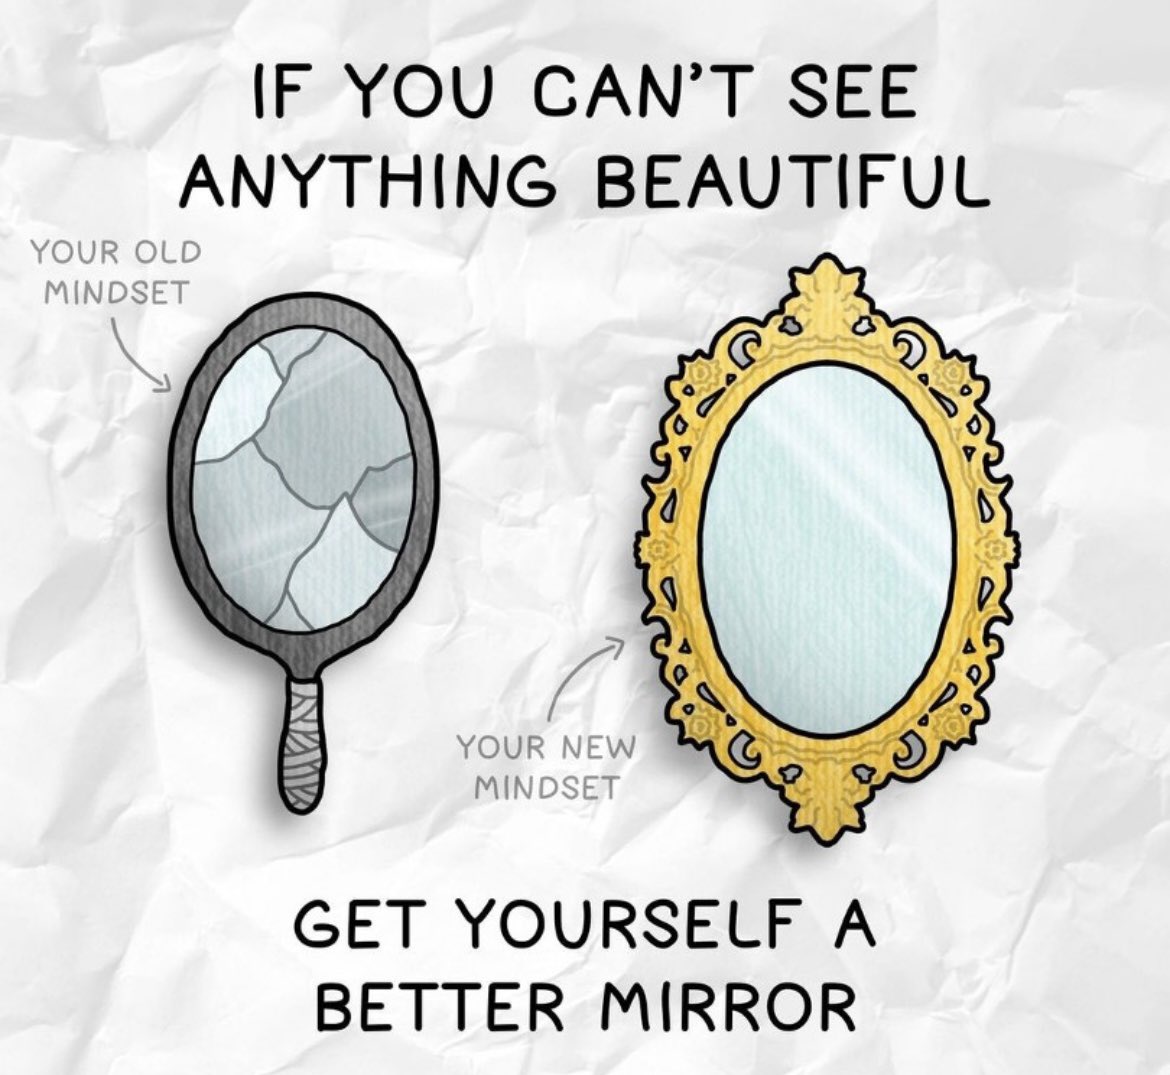 IF YOU CAN'T SEE ANYTHING BEAUTIFUL

GET YOURSELF A BETTER MIRROR

#mindset 
#focusonyourself 
#livelife